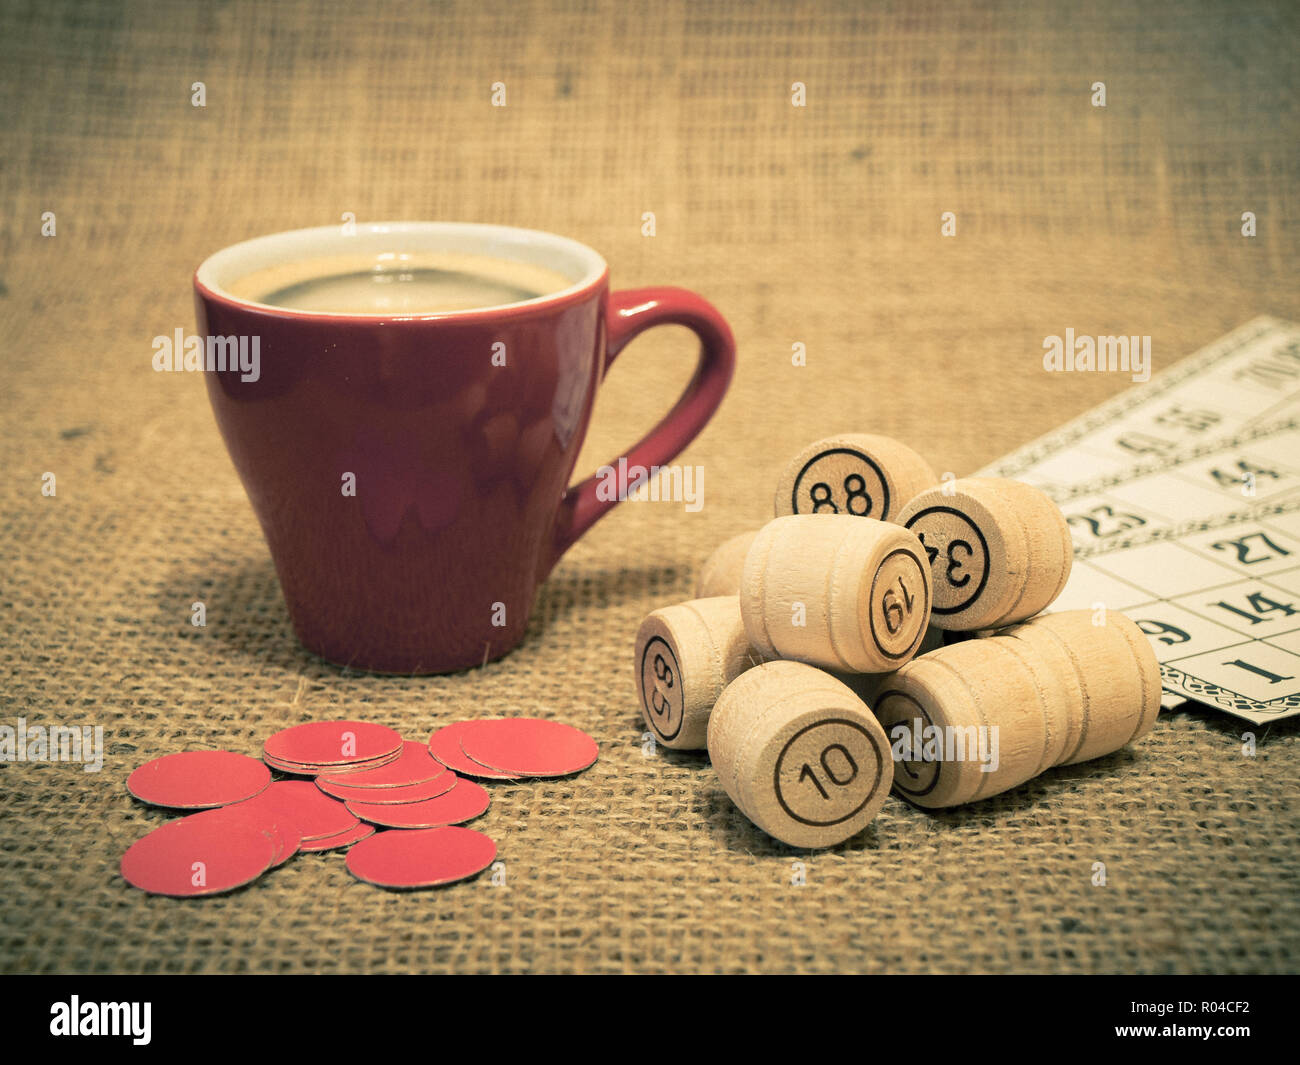 Board game lotto. Wooden lotto barrels, game cards, red chips for a game in lotto and cup of coffee on sackcloth. Color toning effect. Stock Photo